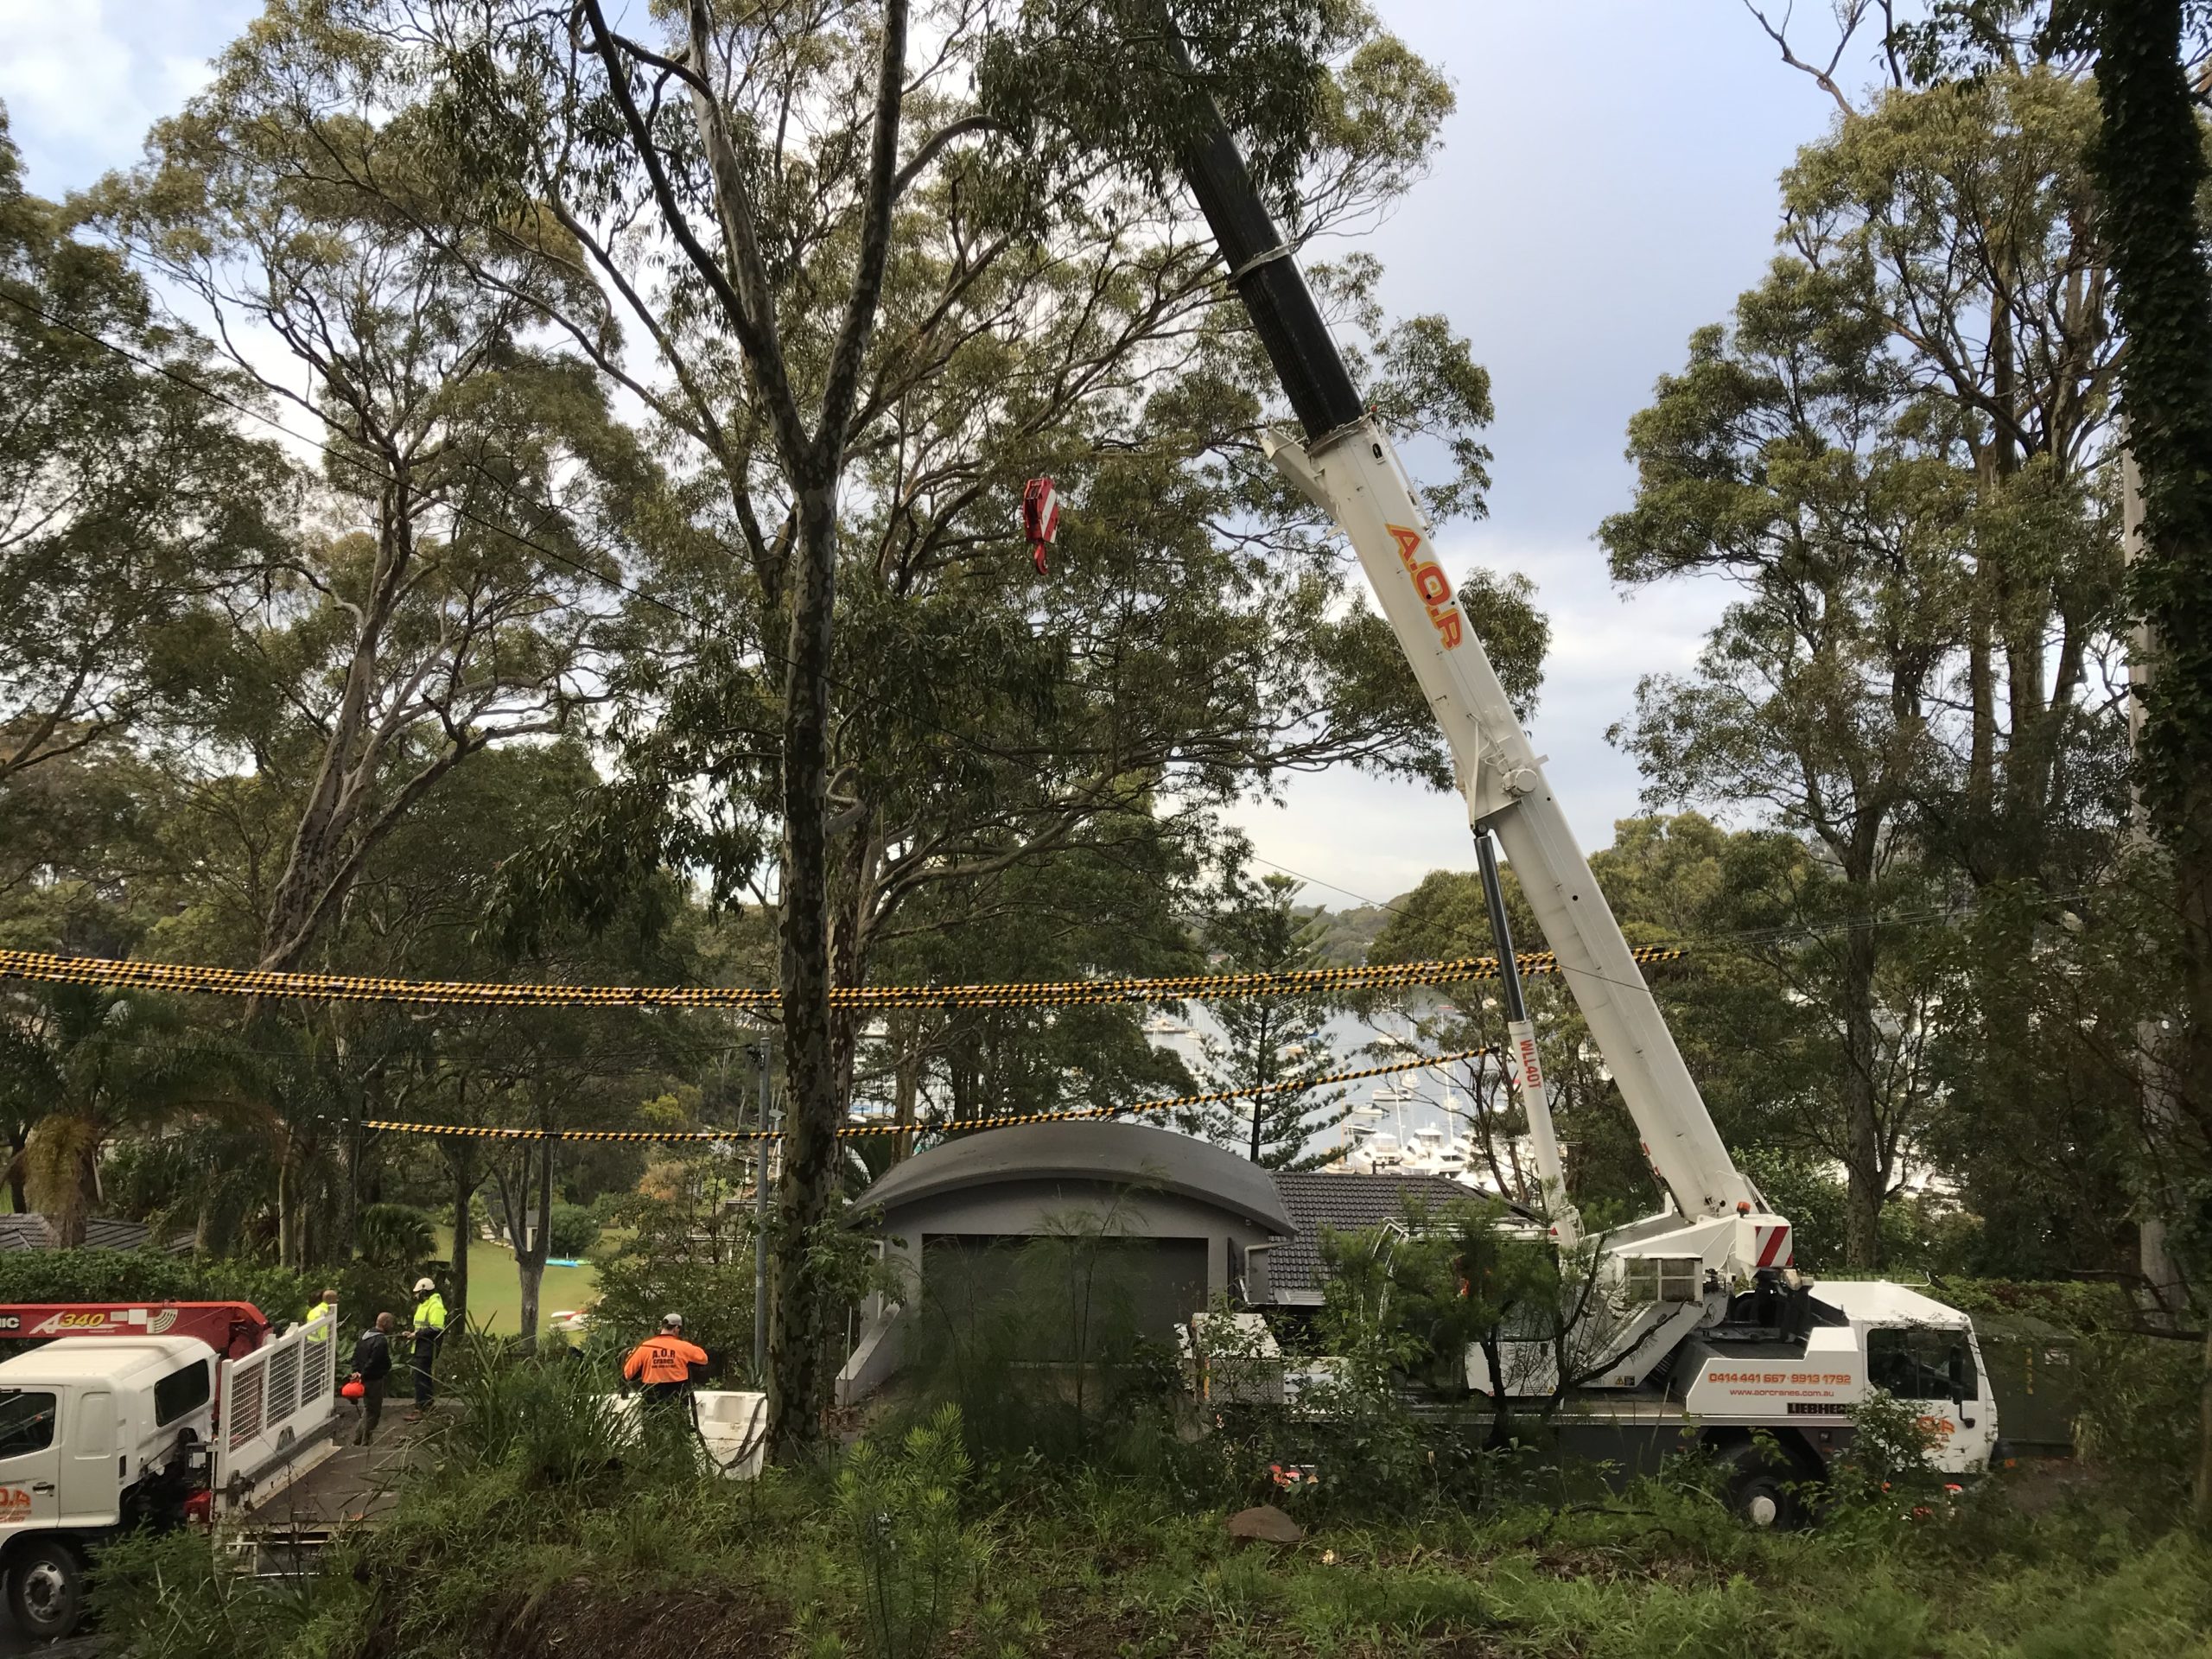 Large crane on site tree removals in Sydney's northern beaches